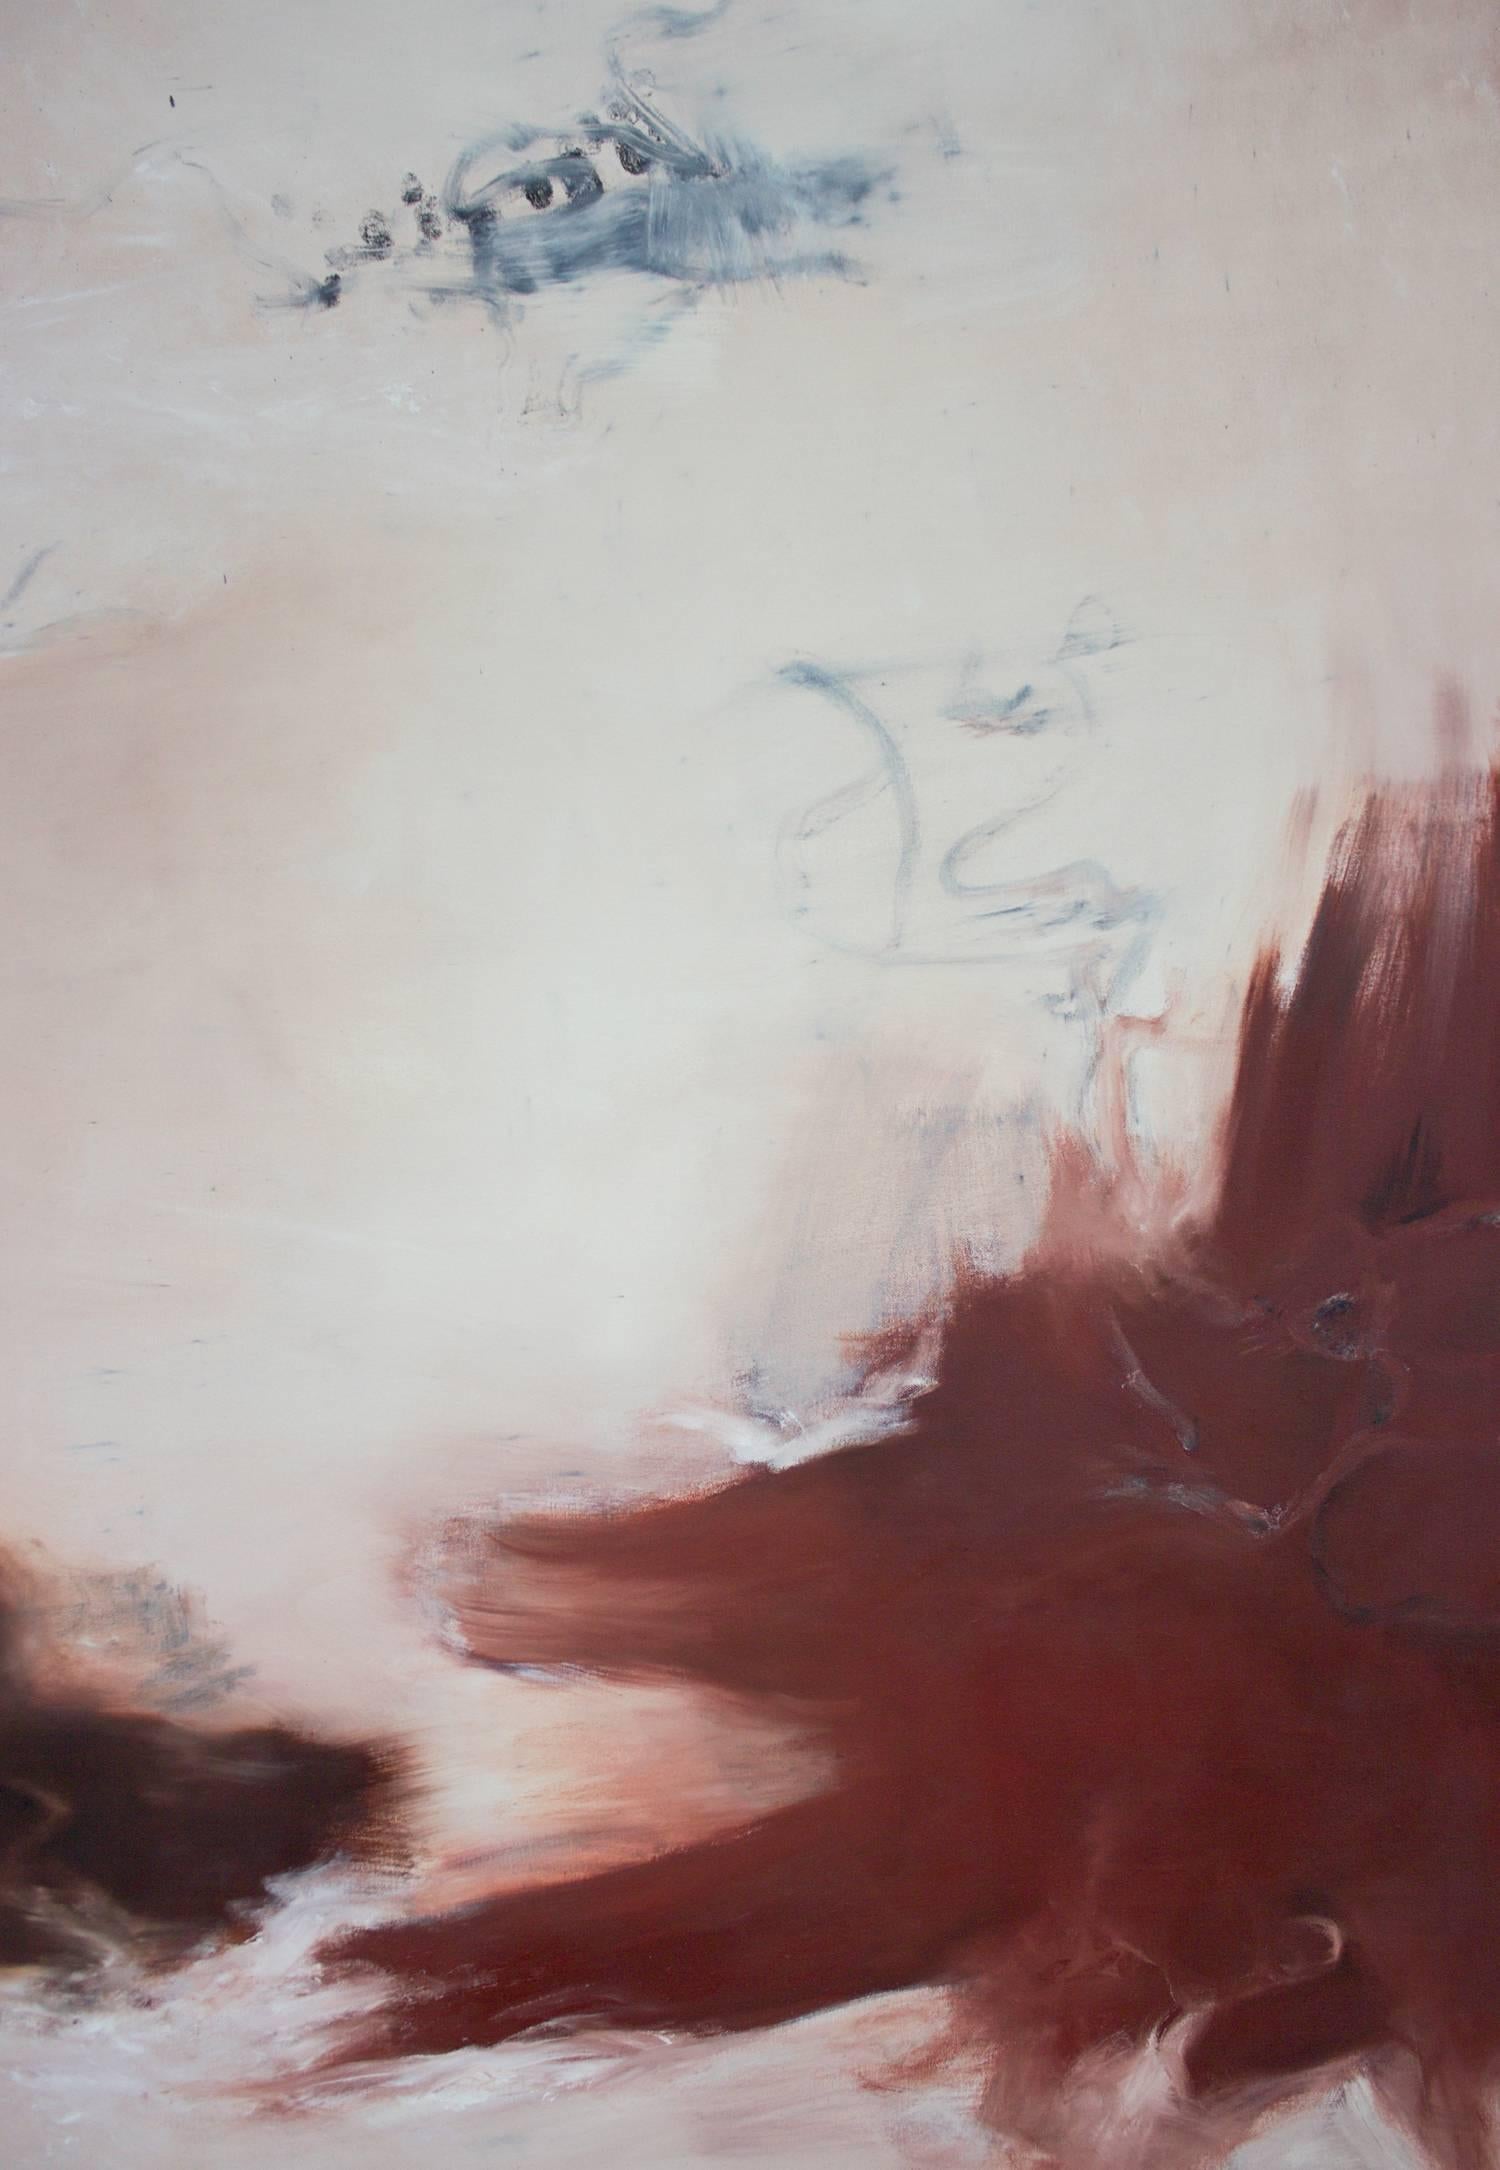 Transposition 7 - oil on canvas 72 x 84 inches - Beige Landscape Painting by Sophie Dixon